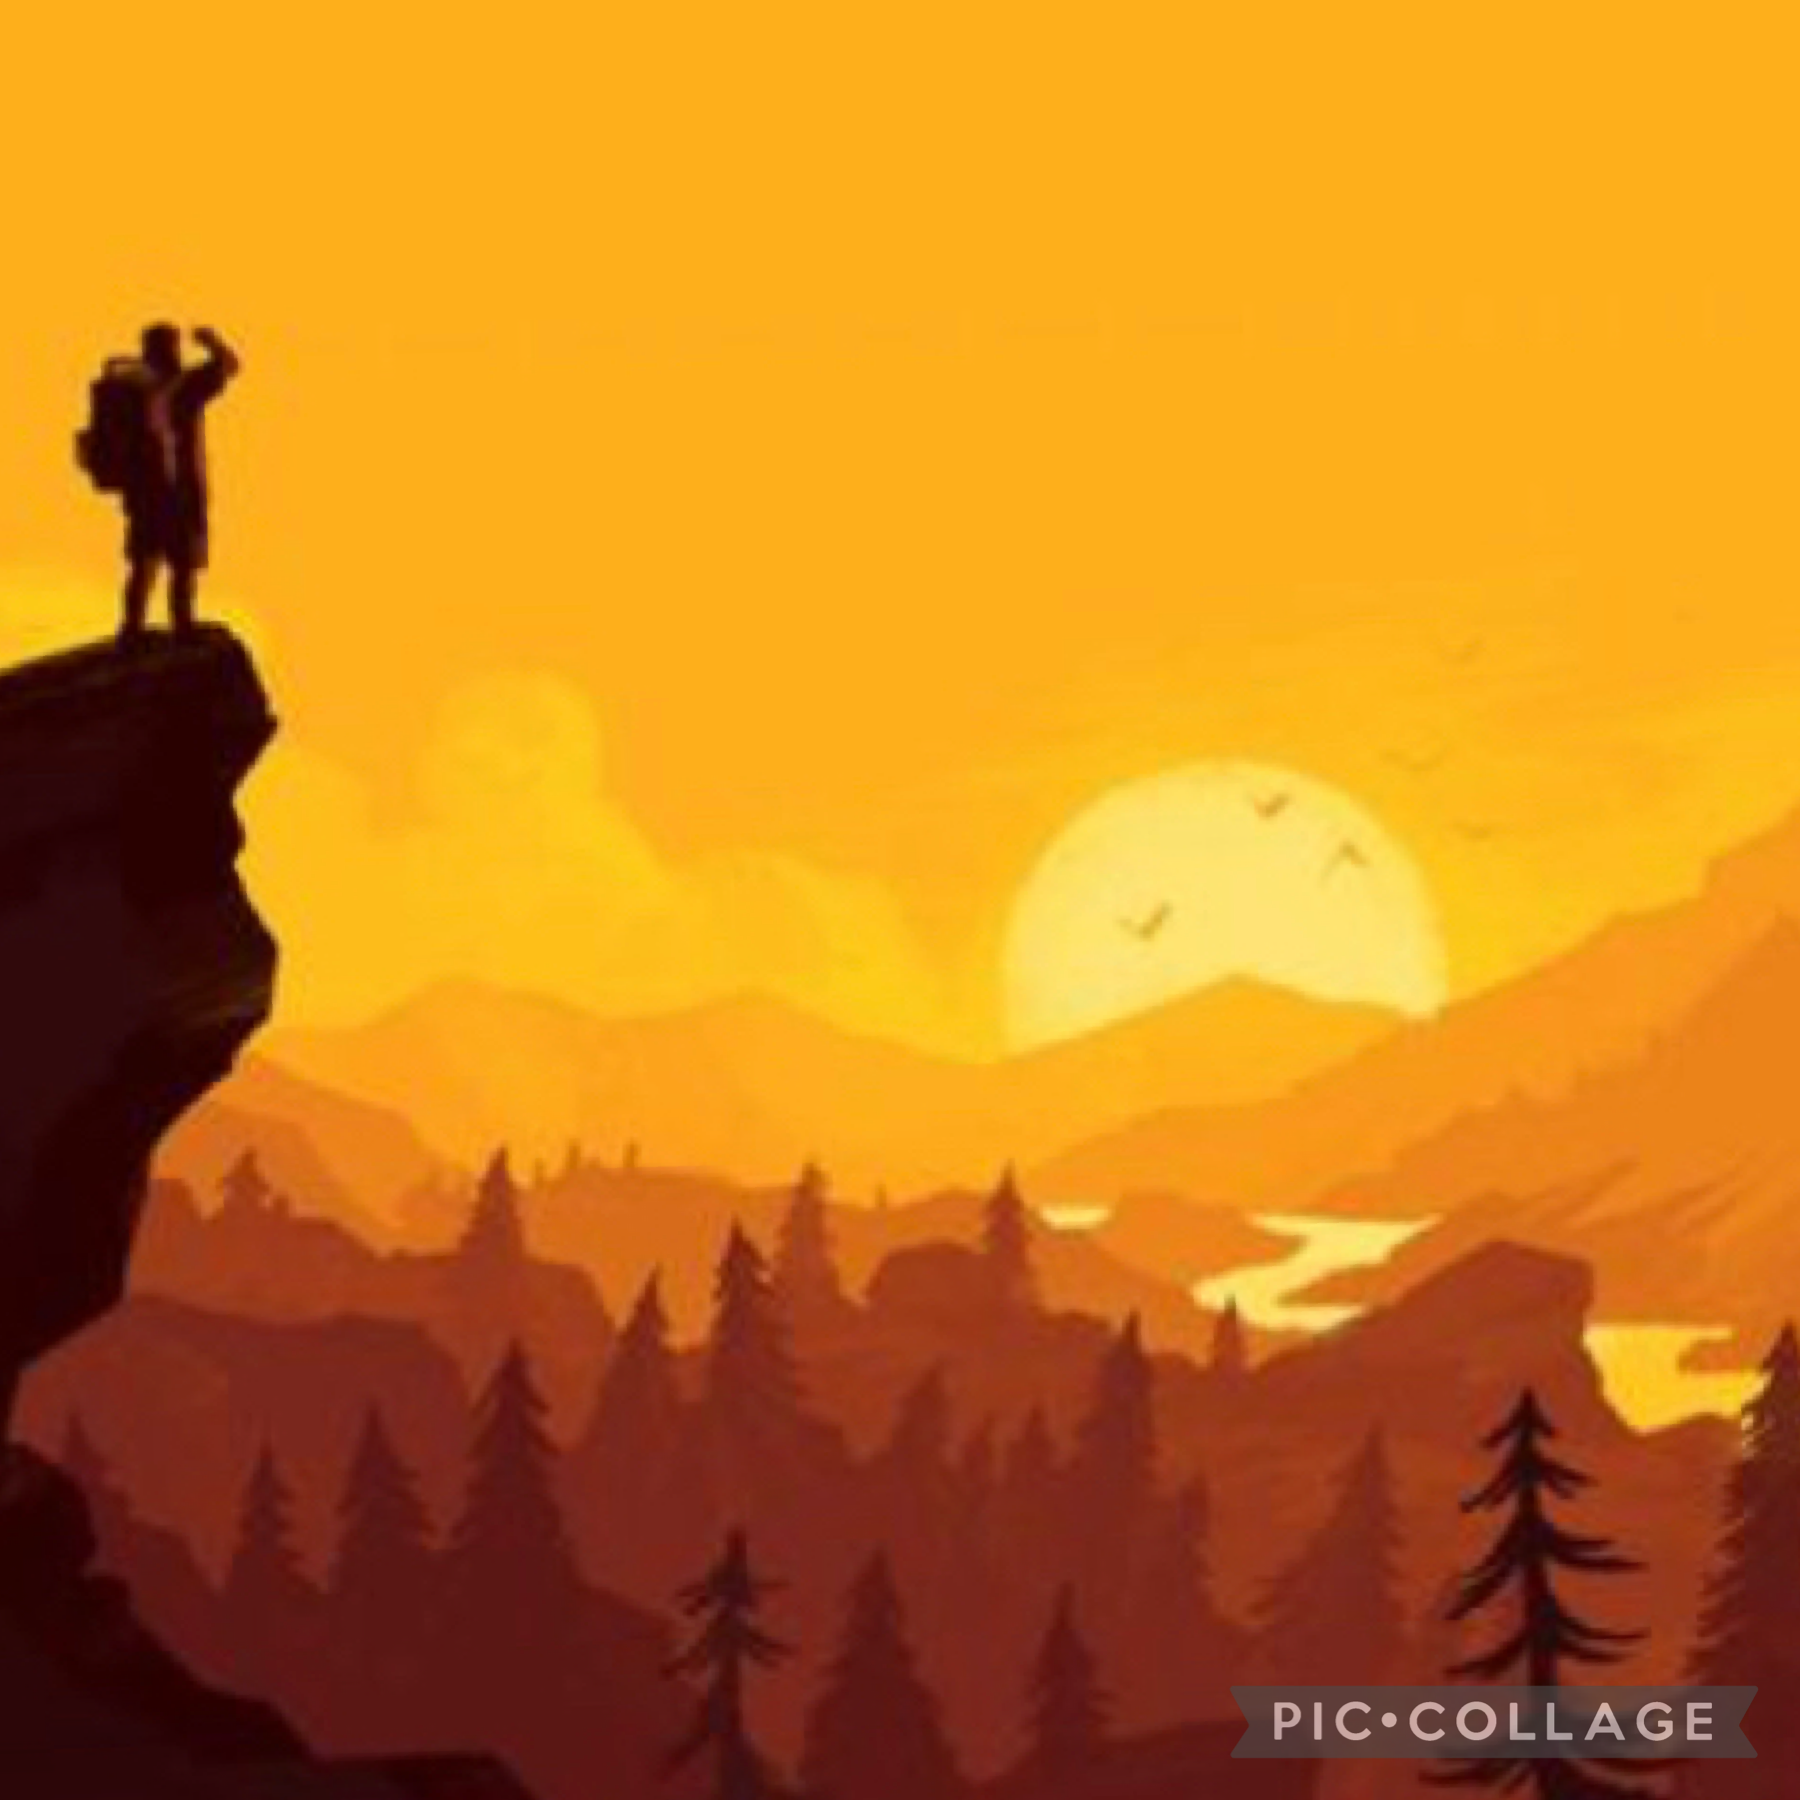 Currently losing my mind over Firewatch. Anyone who’s played wanna chat with me about it? 